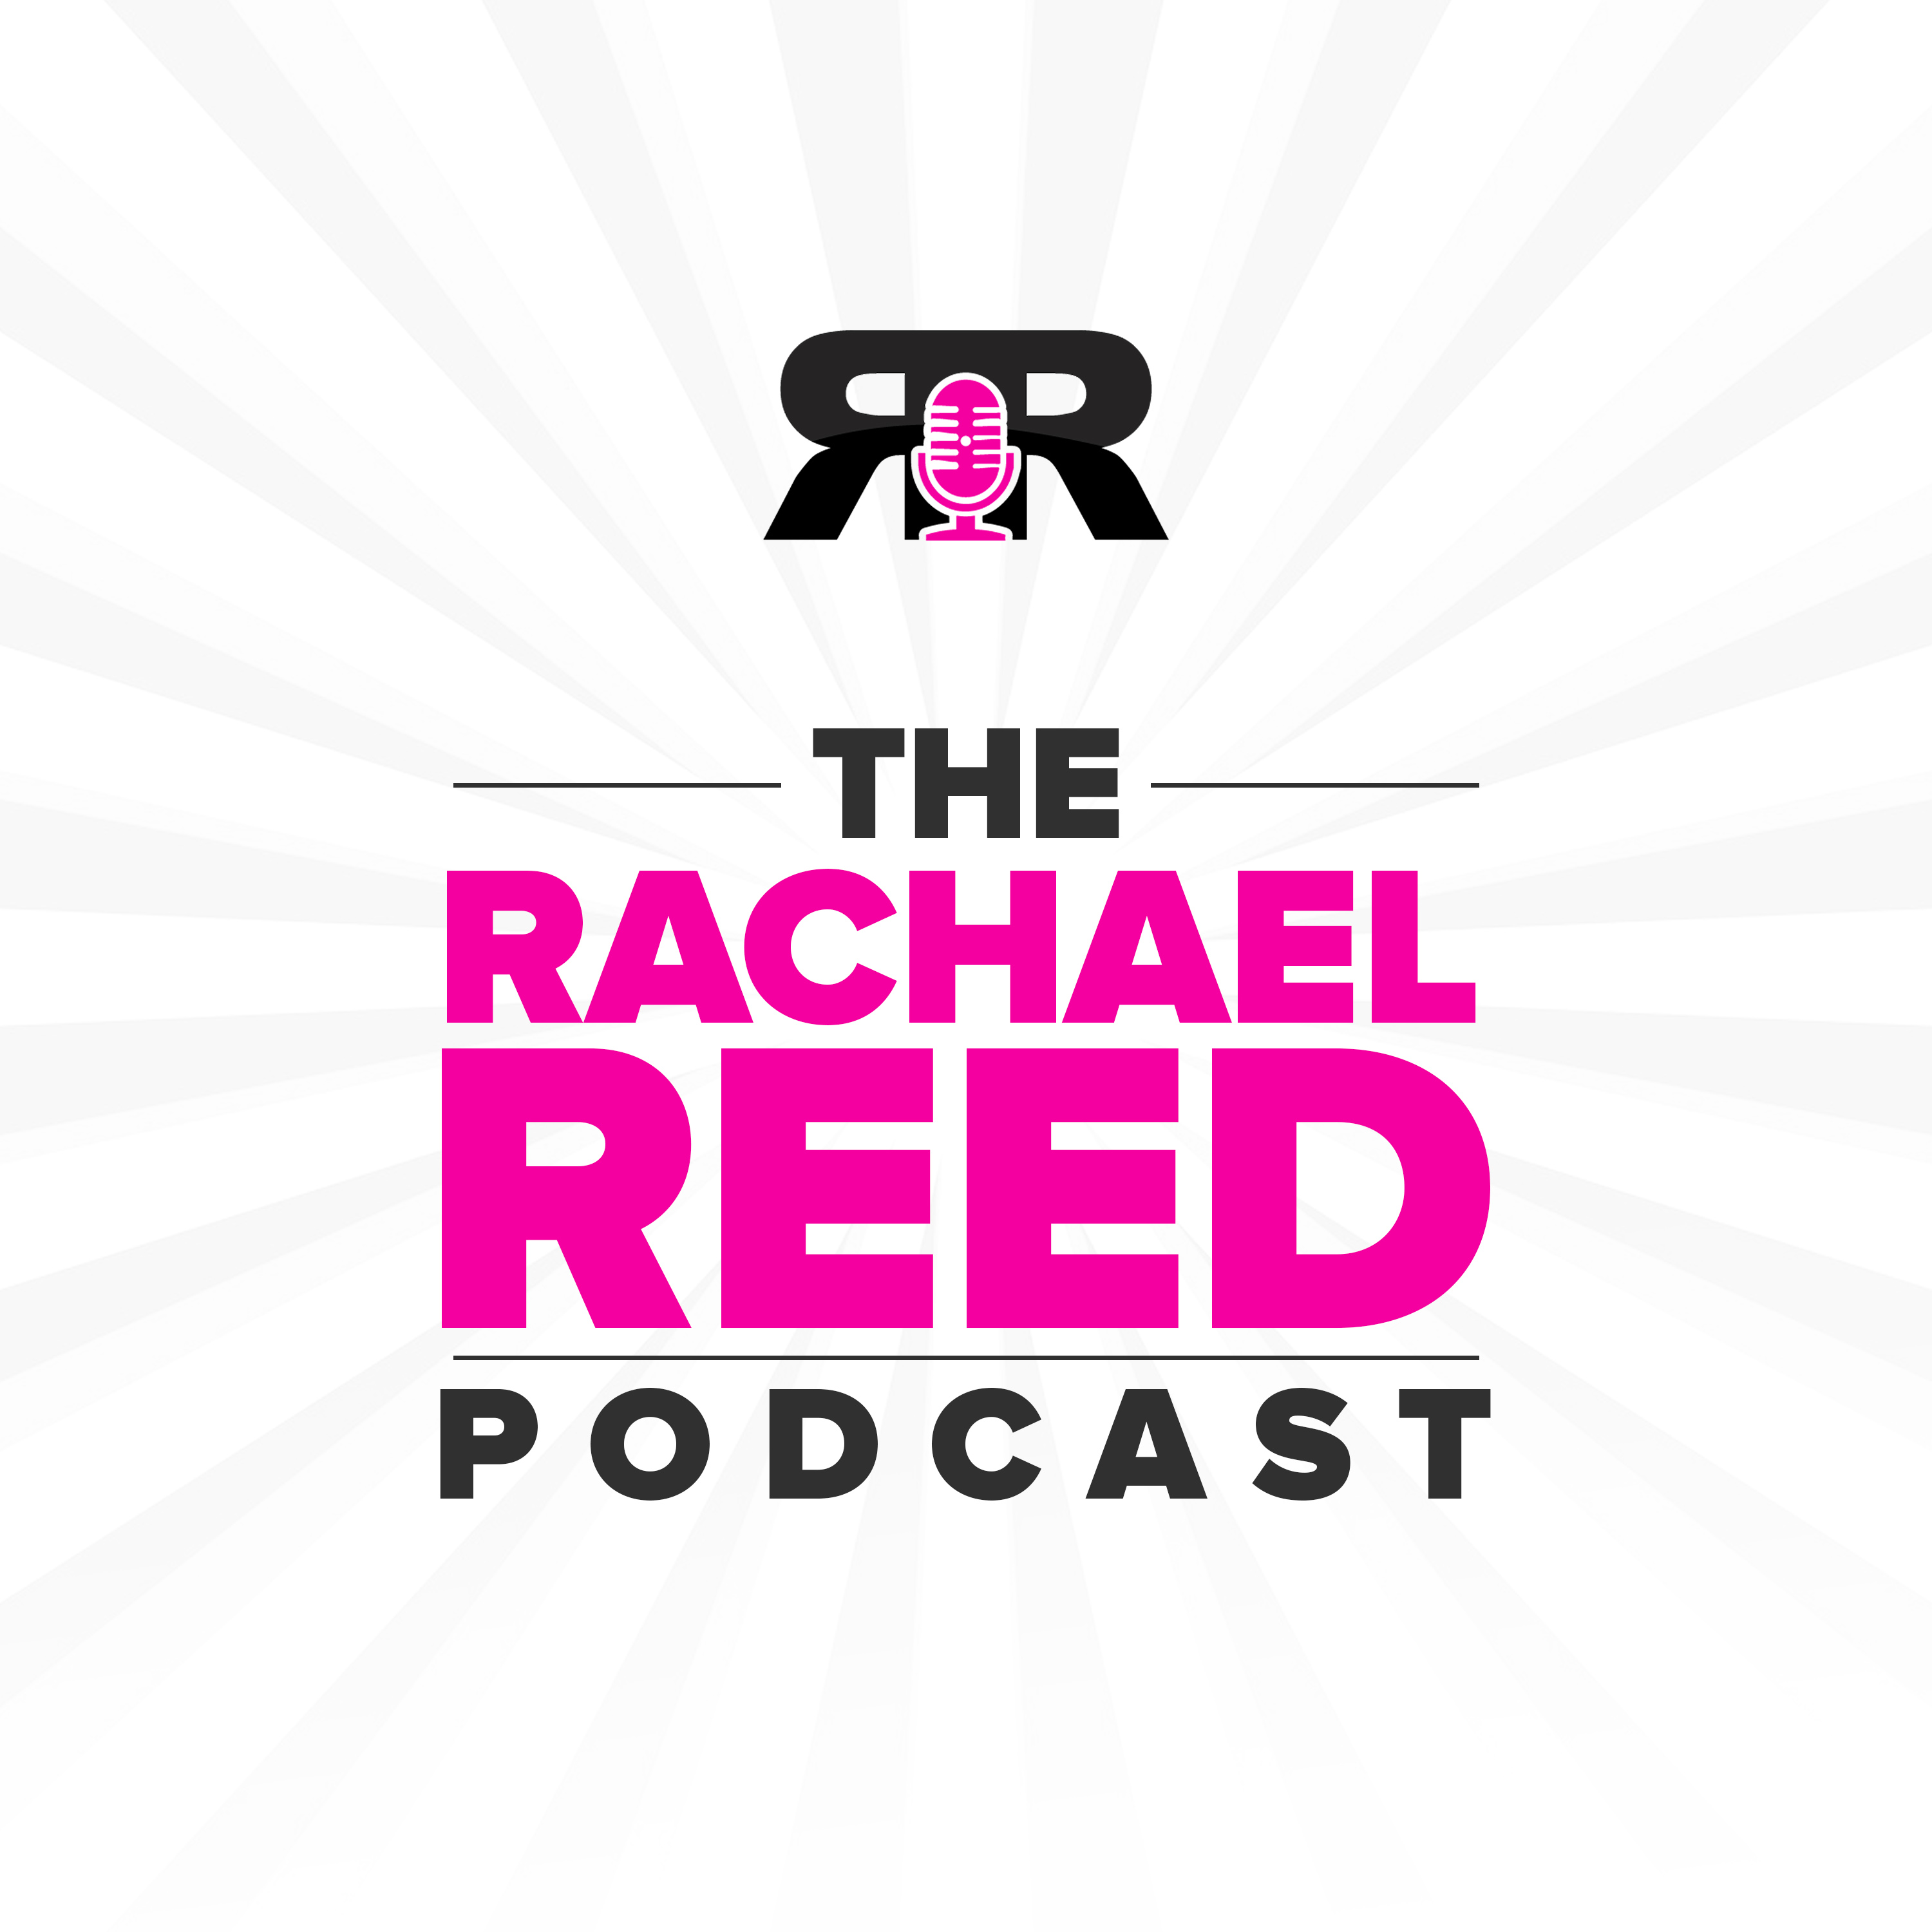 The Rachael Reed Podcast